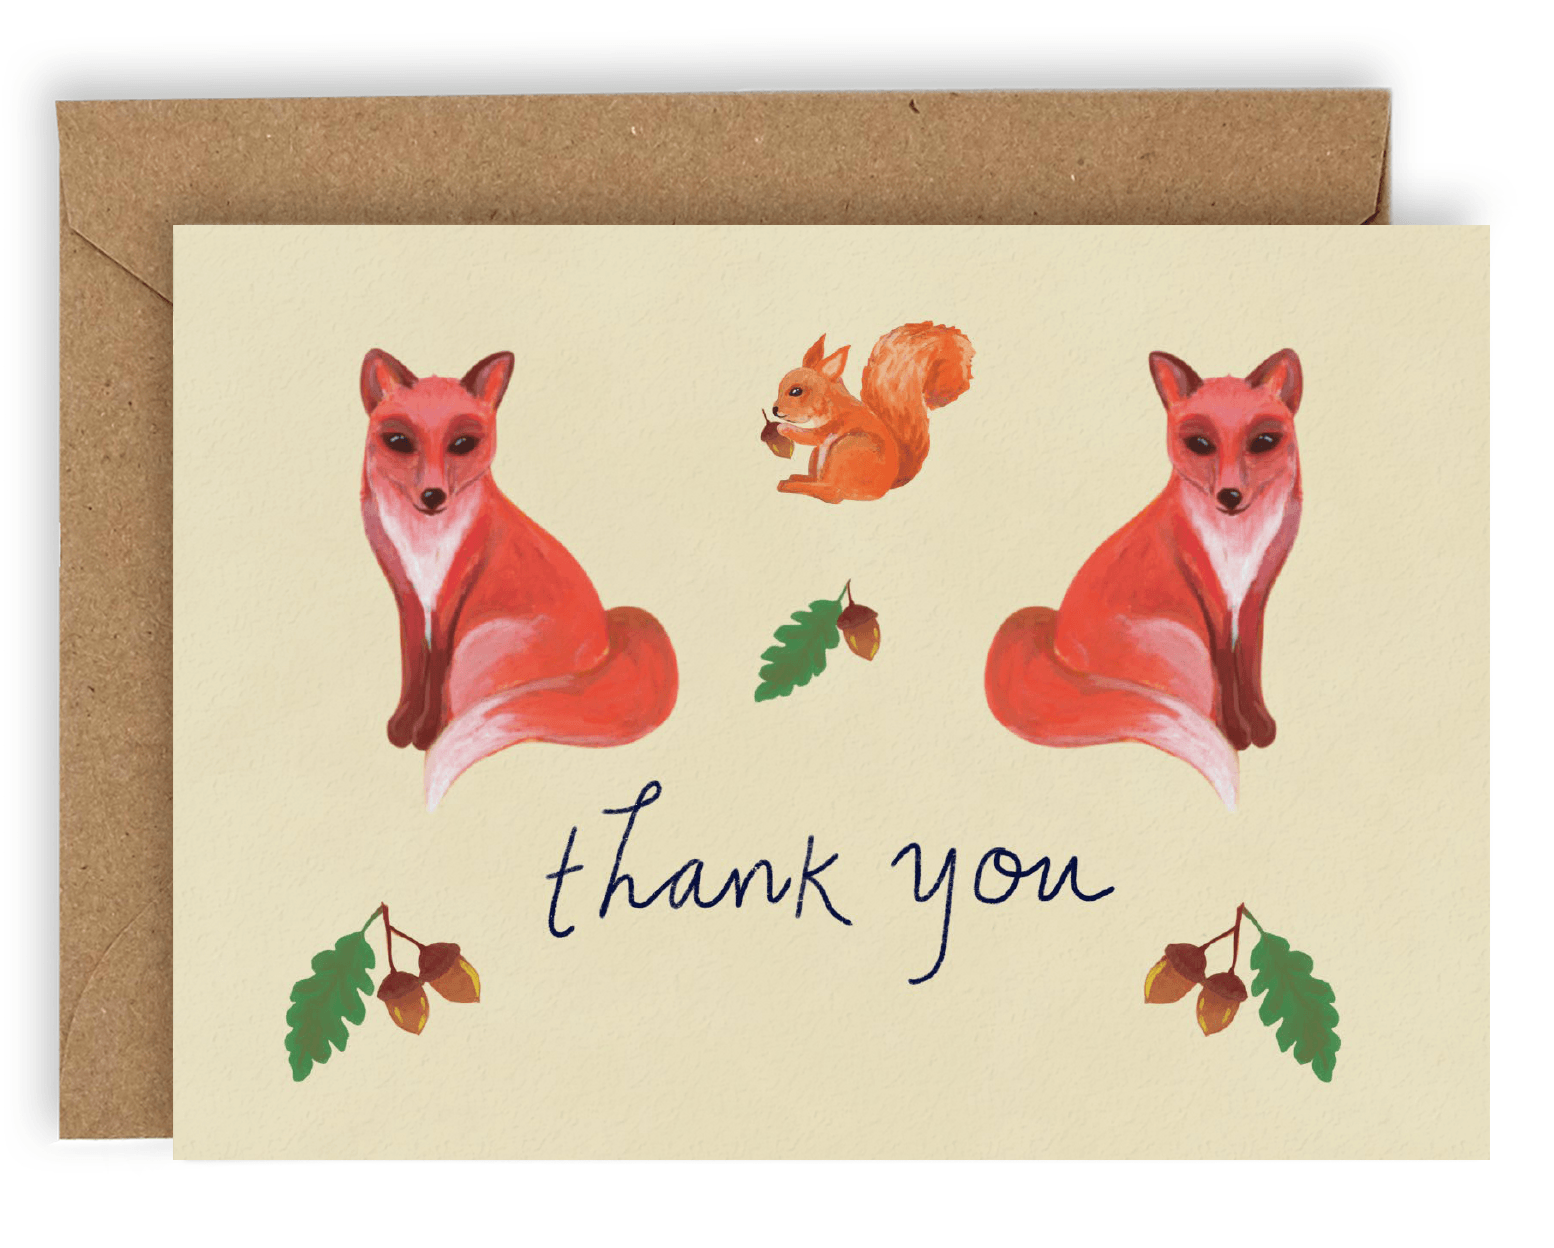 Our new Forest Creatures design with two red/orange foxes facing away from each other with an orange squirrel between them facing left with an Acorn in its hands. Below are the words &quot;Thank You&quot; printed in cursive black ink with two stems of Acorns on either side and a stem of an acorn above. Printed on a cream colored background. Shown With Kraft envelope.